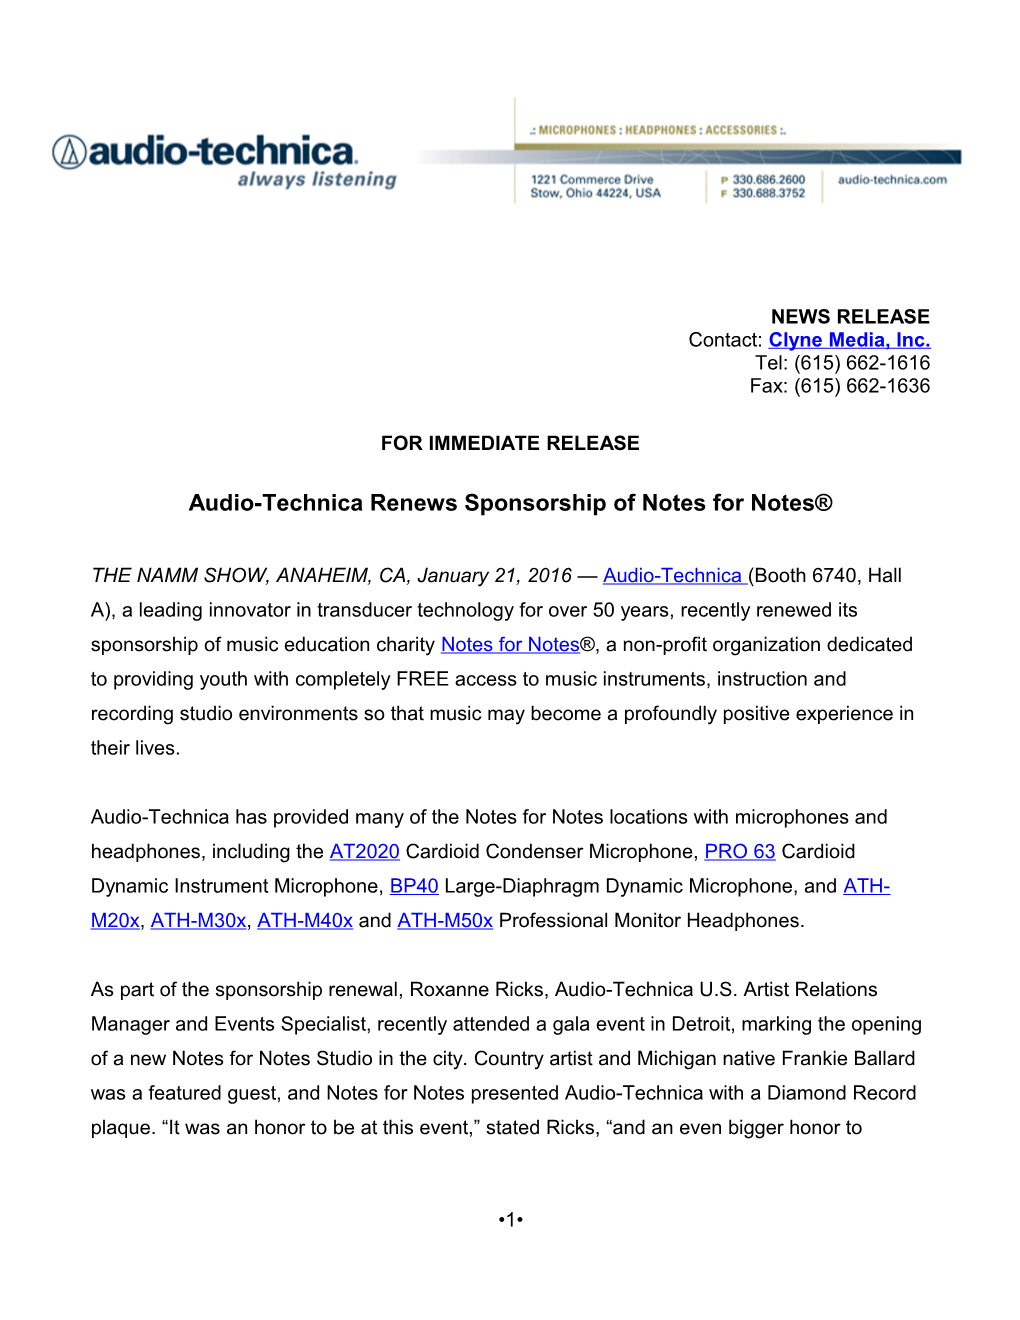 Audio-Technica Renews Sponsorship of Notes for Notes